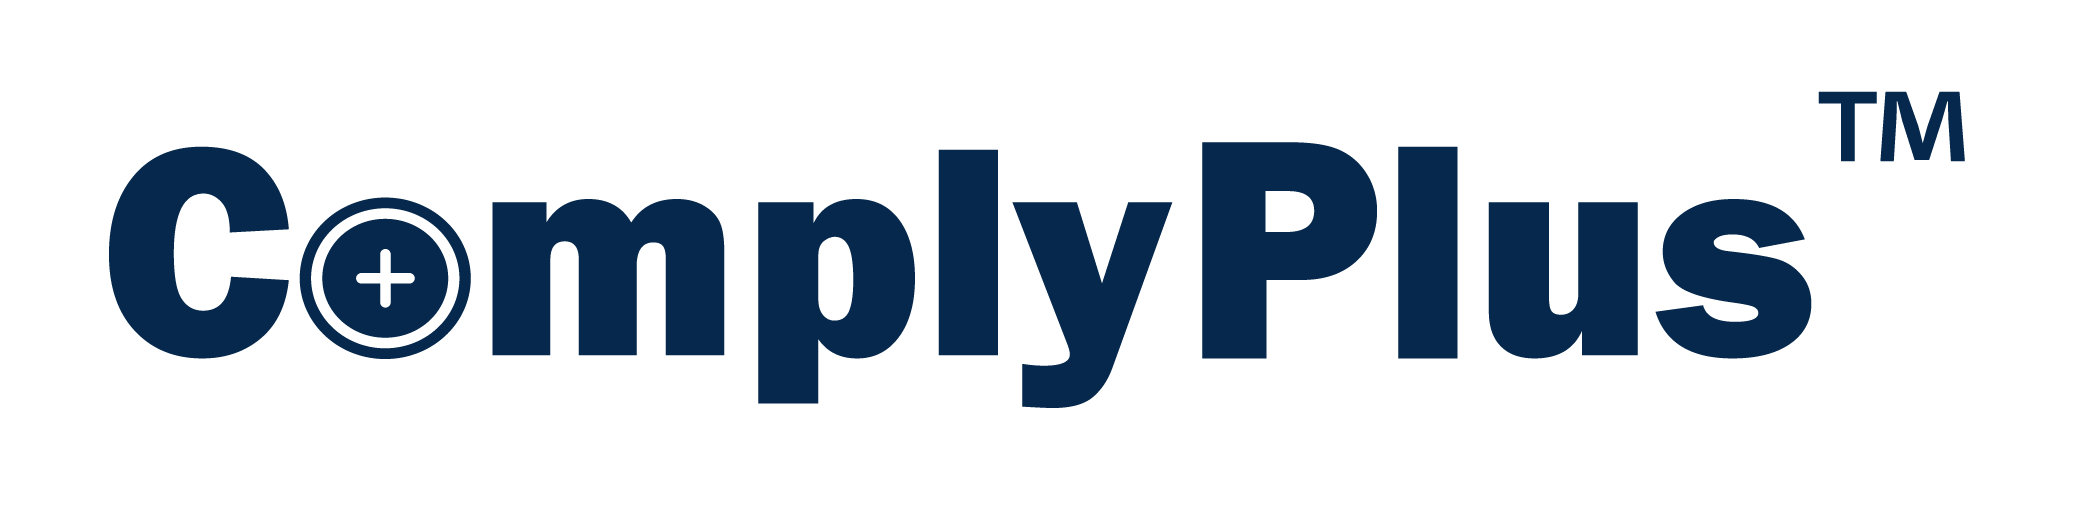 CPD Accredited CPR Training - ComplyPlus LMS ™ - The Mandatory Training Group UK -